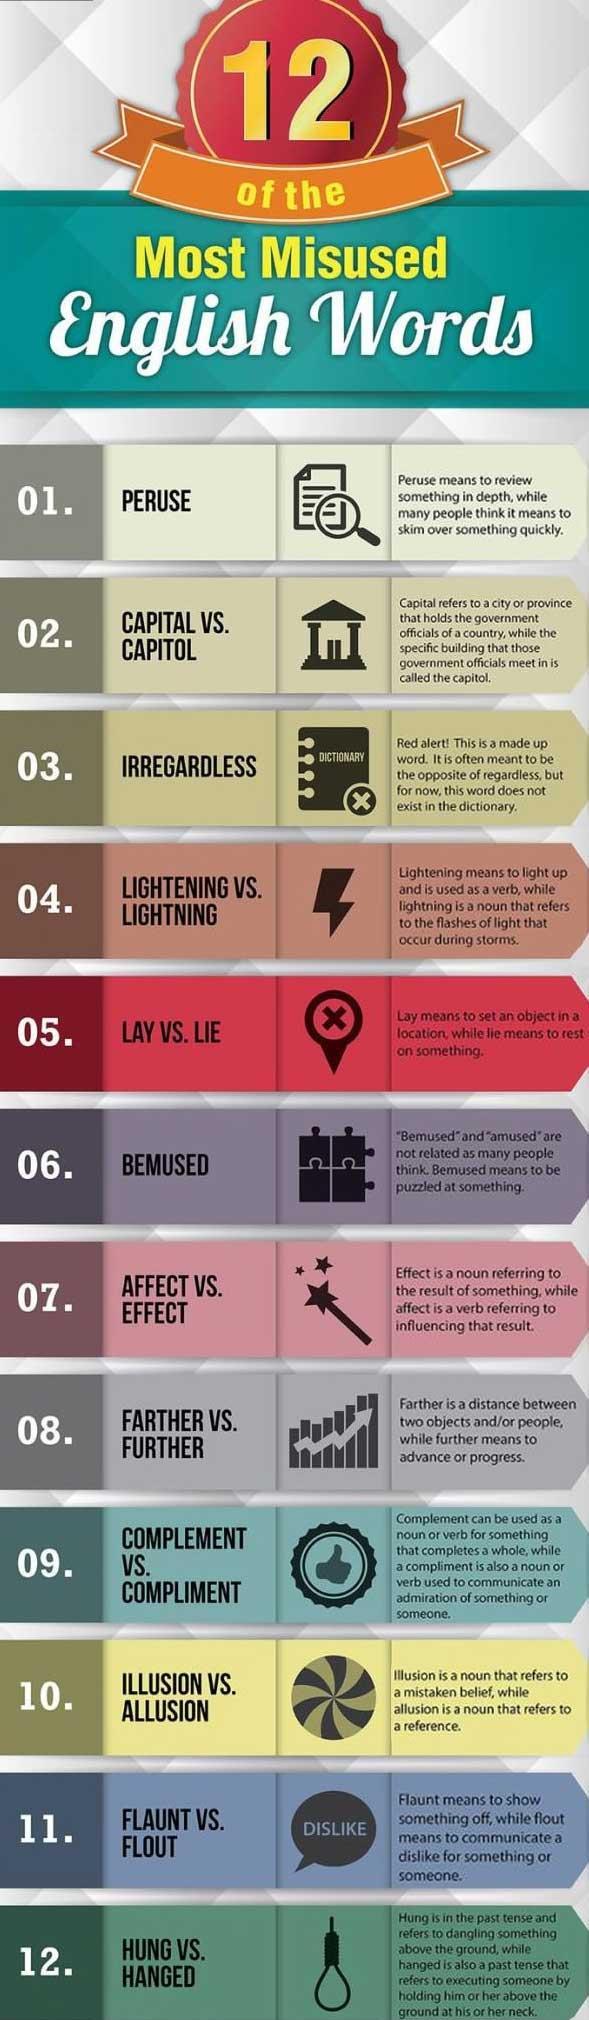 The most misused english words